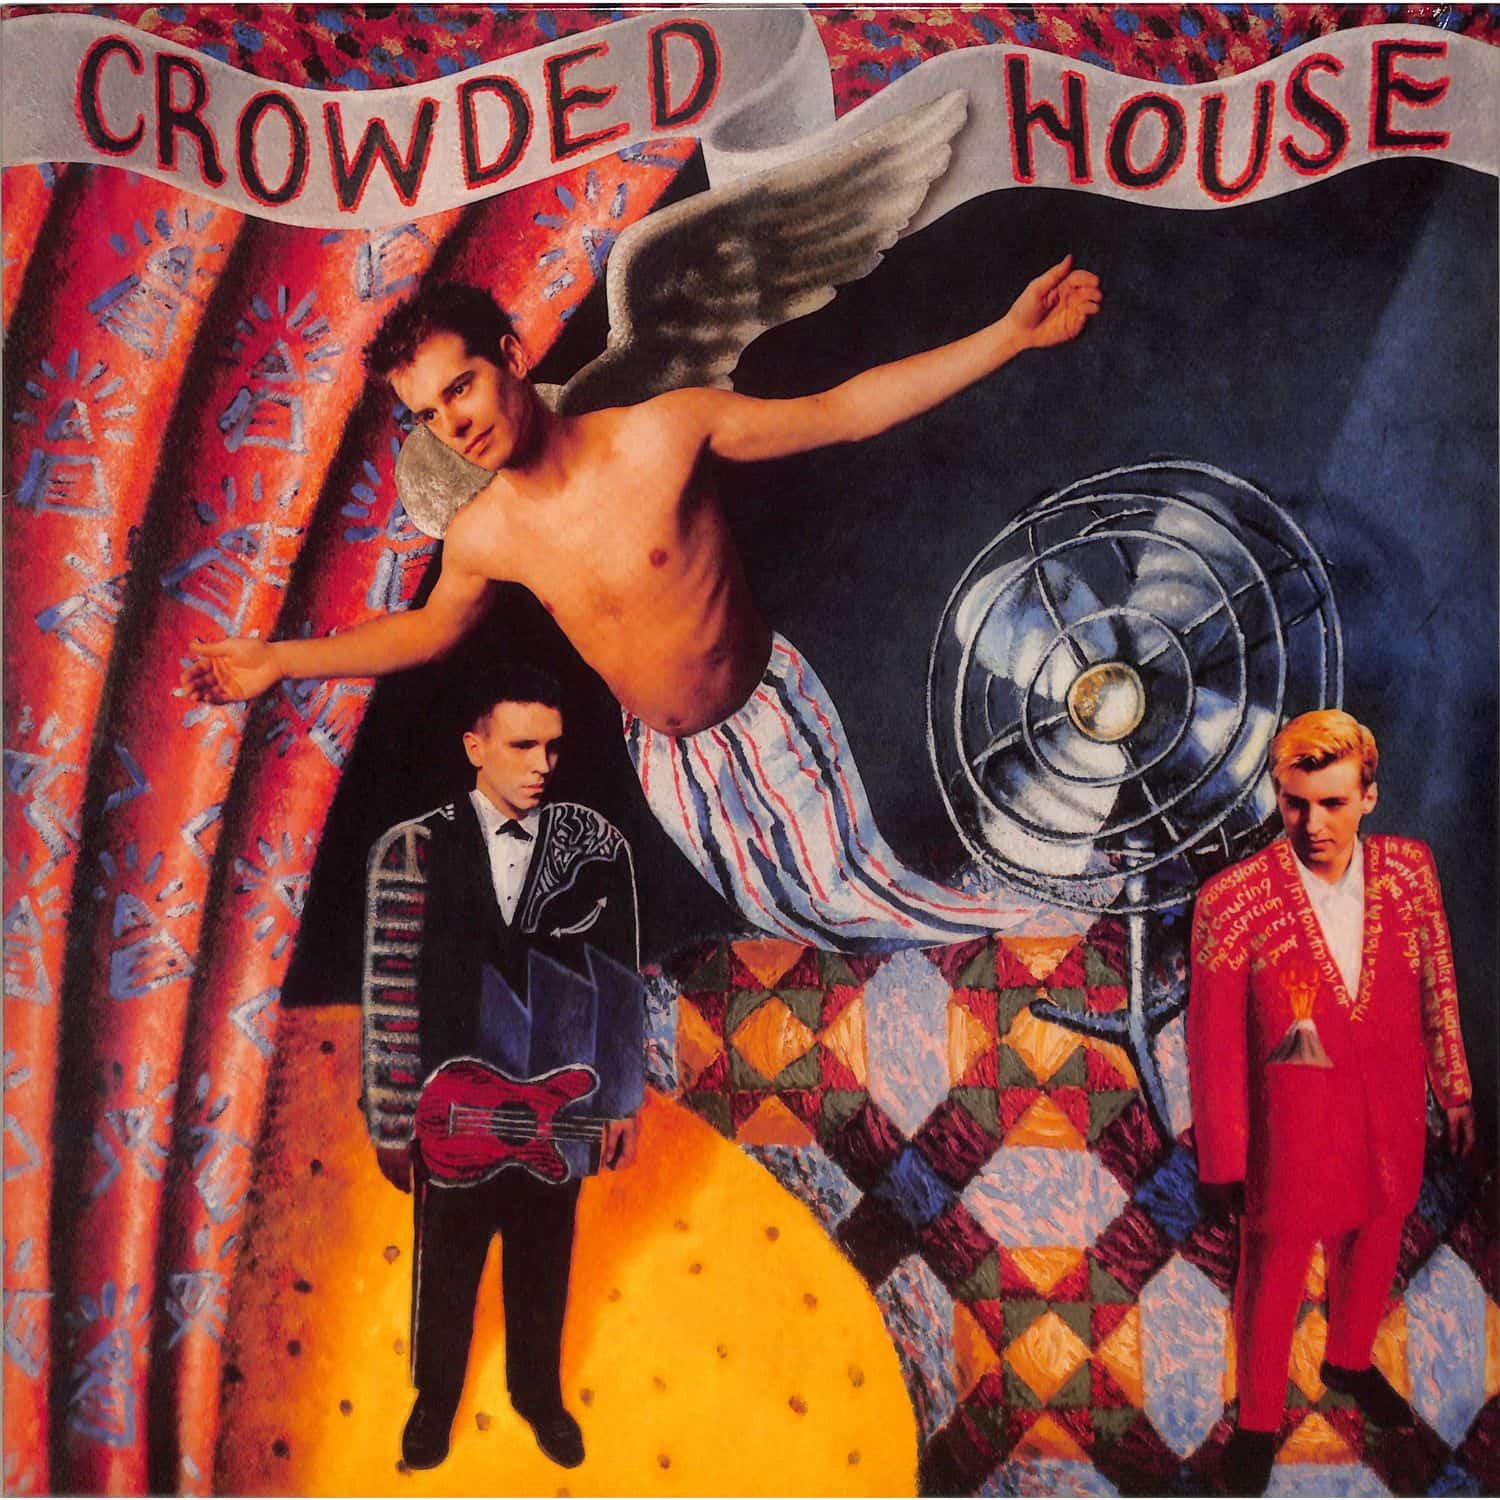 Crowded House - CROWDED HOUSE 